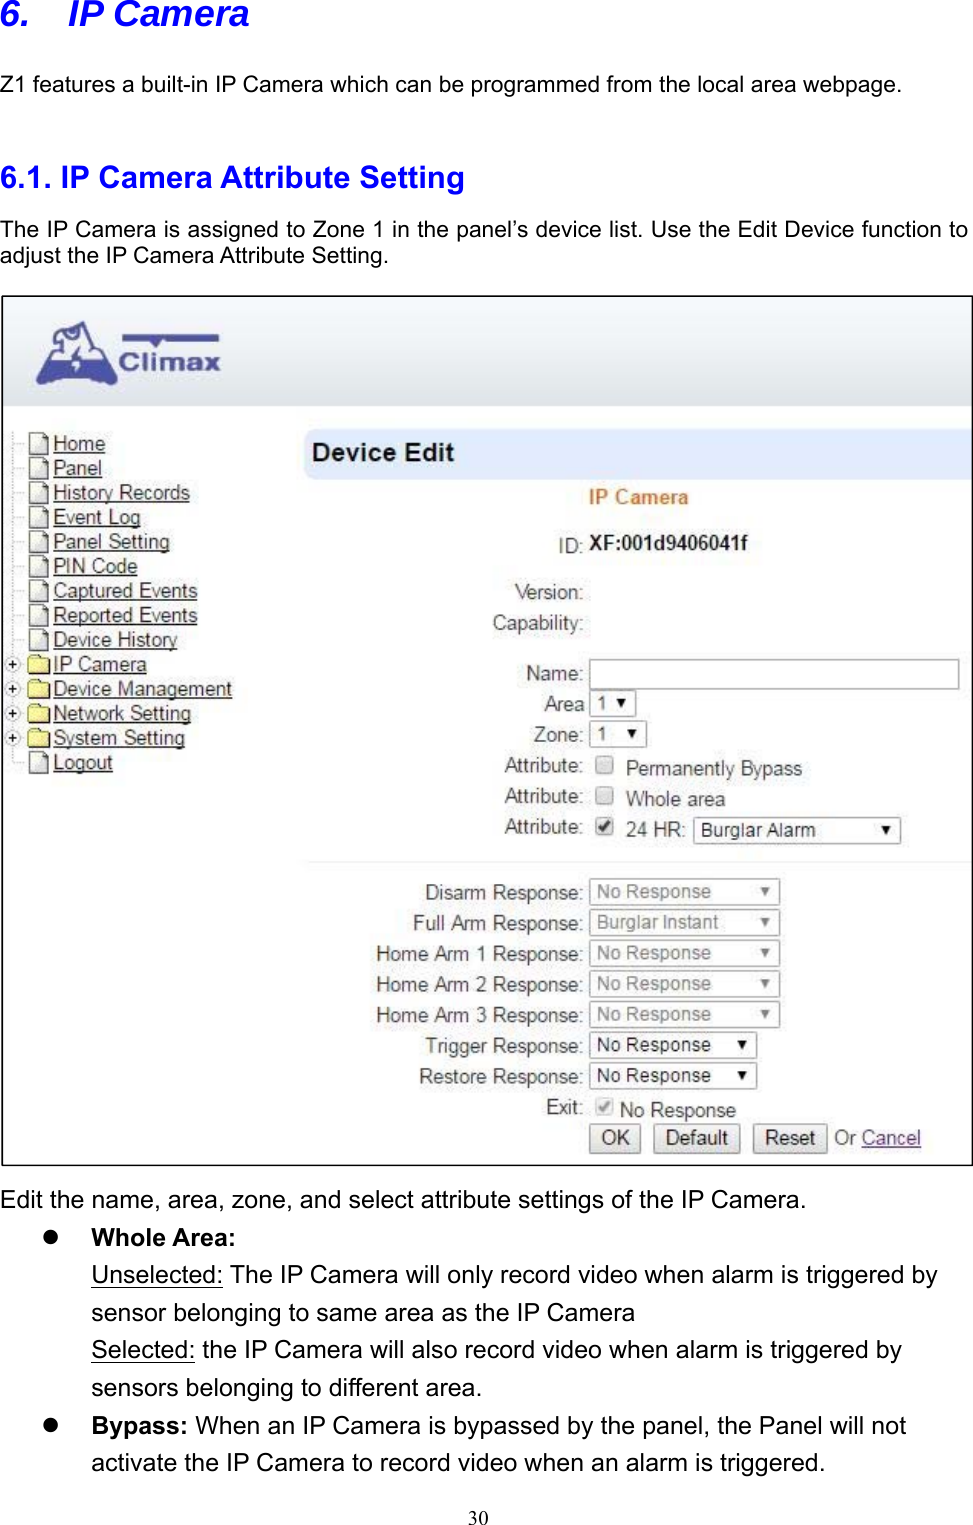  306. IP Camera Z1 features a built-in IP Camera which can be programmed from the local area webpage.    6.1. IP Camera Attribute Setting   The IP Camera is assigned to Zone 1 in the panel’s device list. Use the Edit Device function to adjust the IP Camera Attribute Setting.    Edit the name, area, zone, and select attribute settings of the IP Camera.  Whole Area:   Unselected: The IP Camera will only record video when alarm is triggered by sensor belonging to same area as the IP Camera Selected: the IP Camera will also record video when alarm is triggered by sensors belonging to different area.    Bypass: When an IP Camera is bypassed by the panel, the Panel will not activate the IP Camera to record video when an alarm is triggered. 